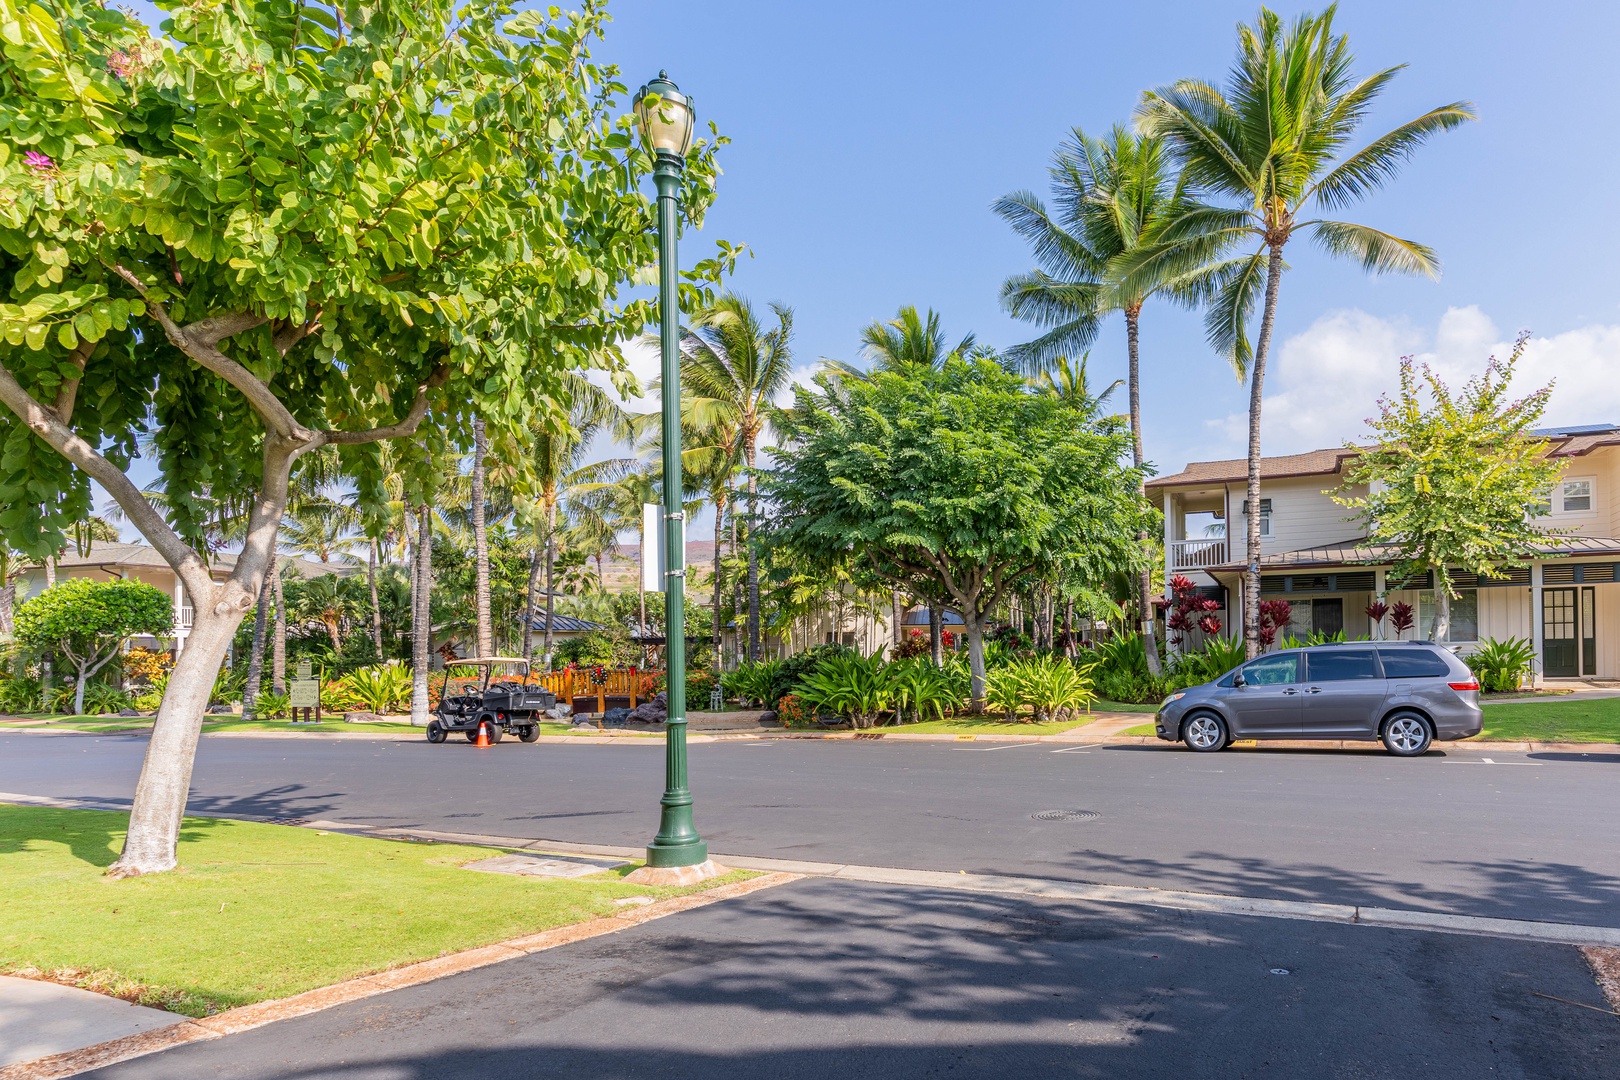 Kapolei Vacation Rentals, Coconut Plantation 1234-2 - A view of the neighborhood.